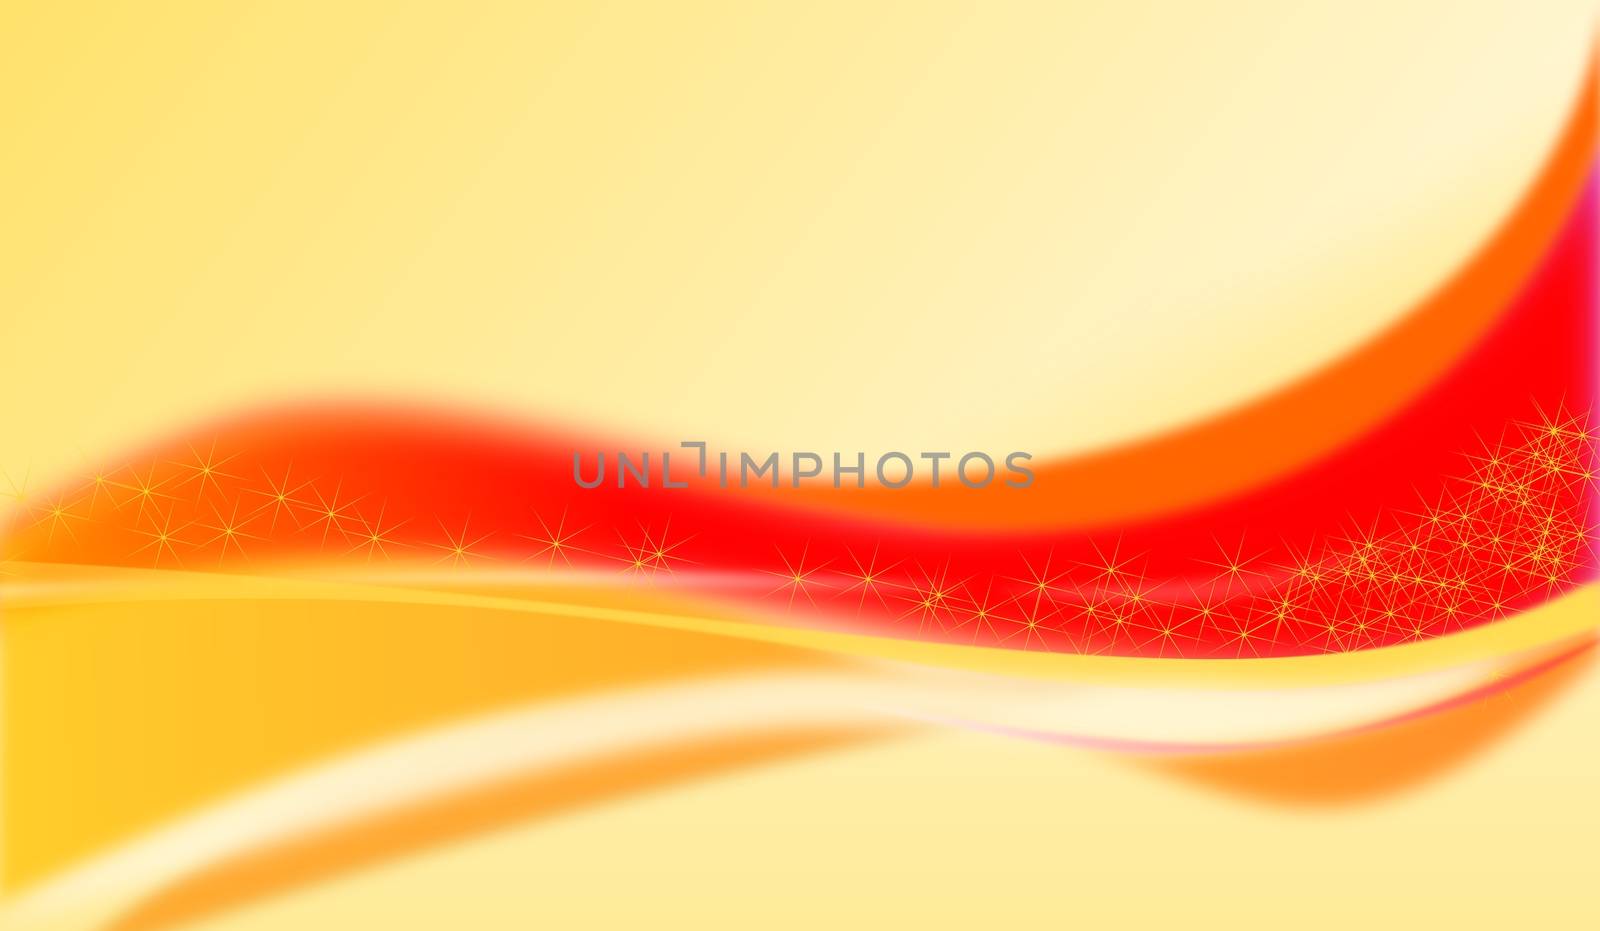 Abstract composition. Illustration with orange and red color.